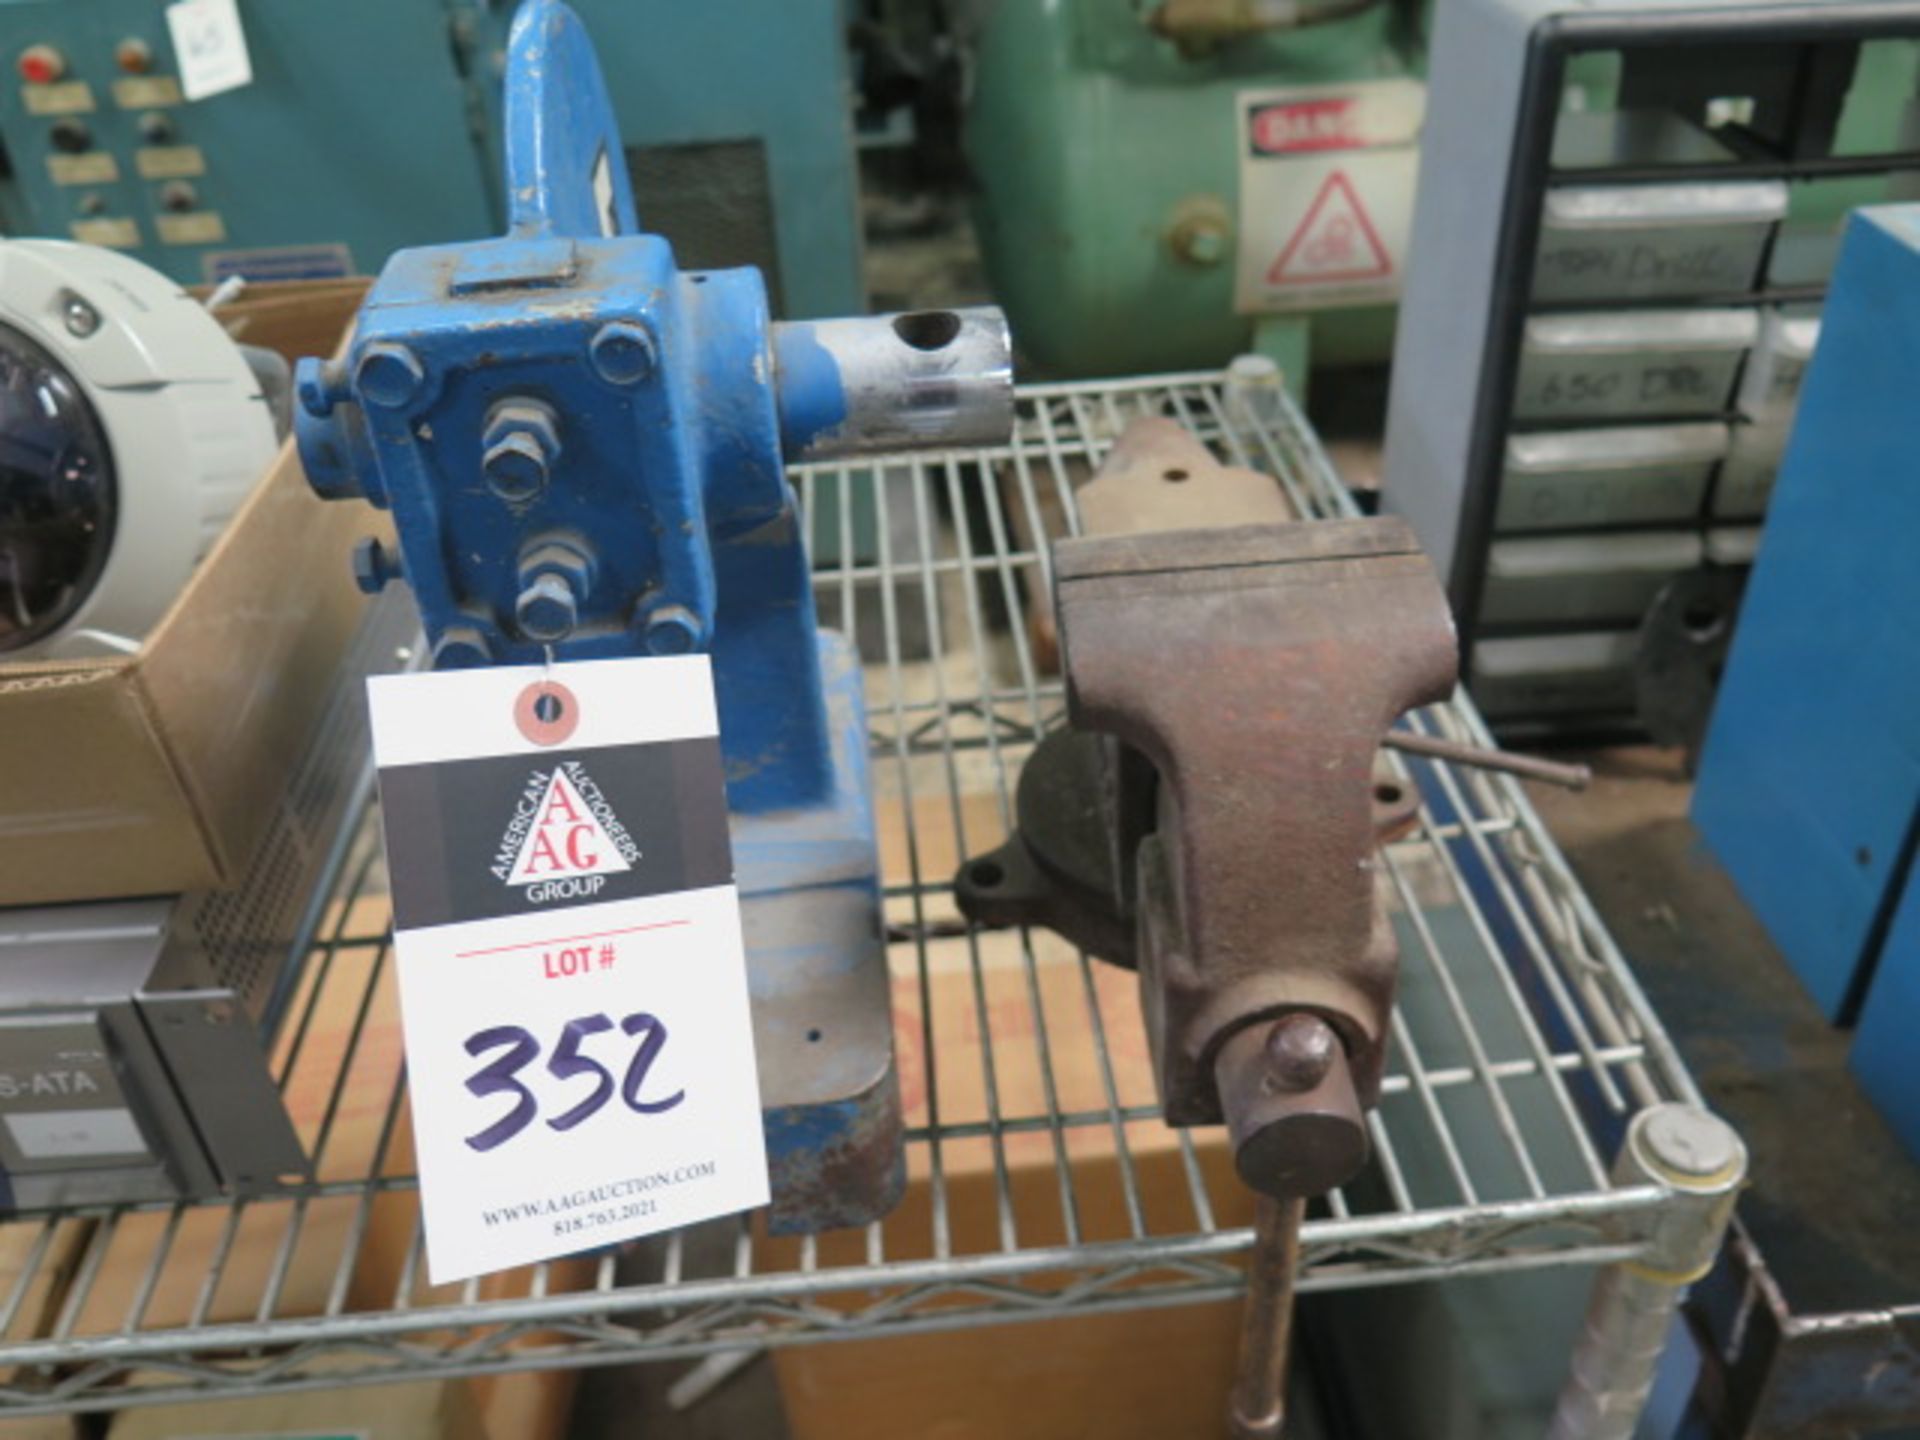 4" Bench Vise and Arbor Press (SOLD AS-IS - NO WARRANTY)